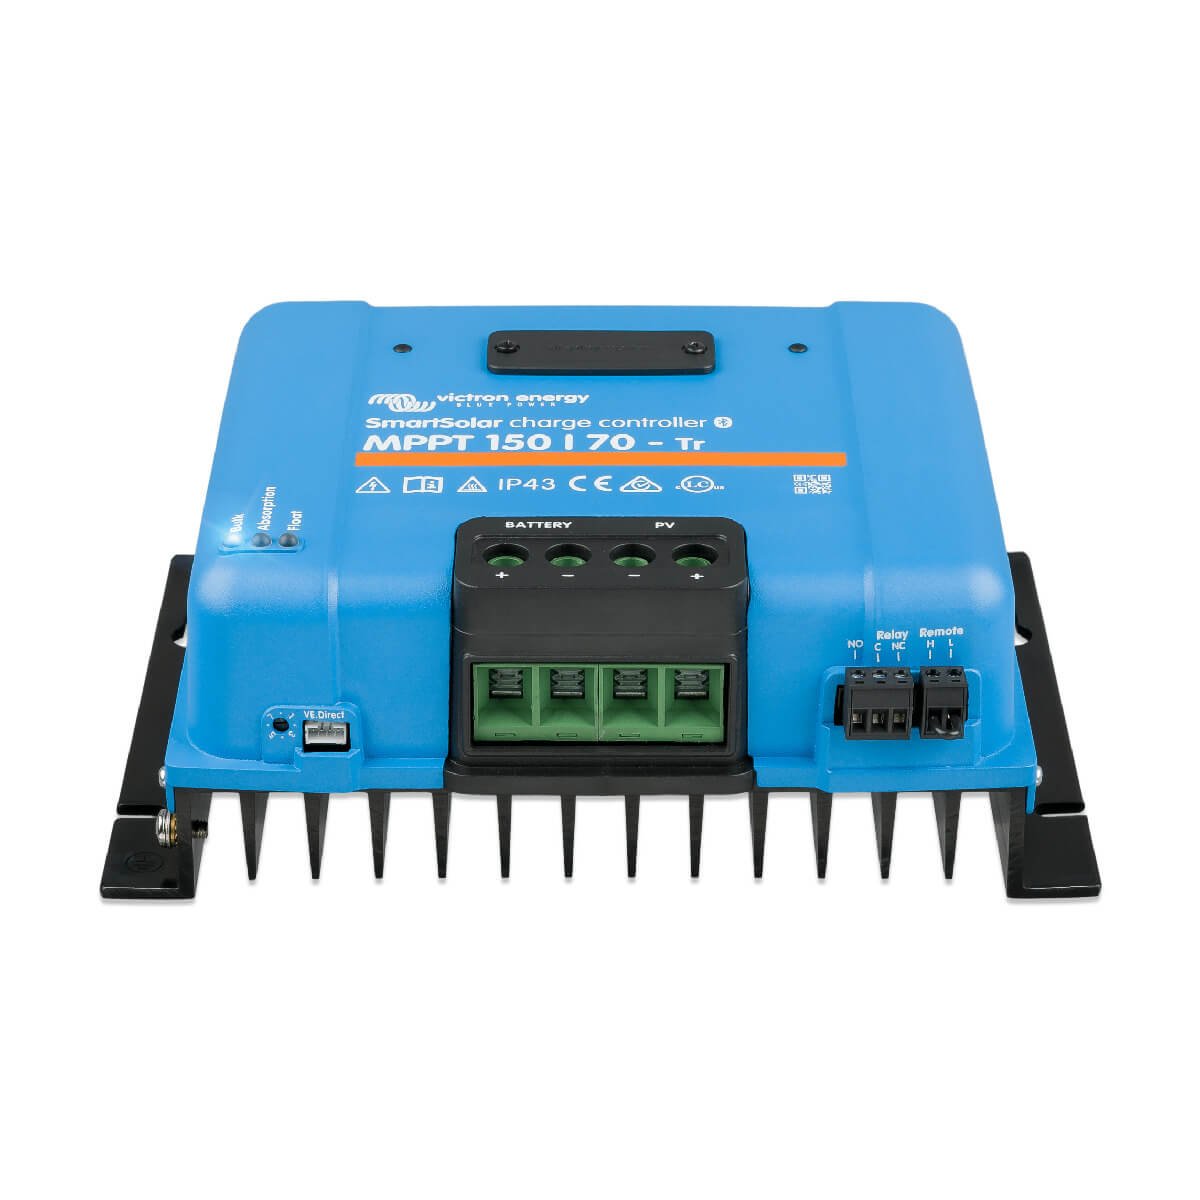 The blue Victron MPPT 150/70 - SmartSolar Charge Controller - Tr features multiple ports and cooling fins for efficient power management.